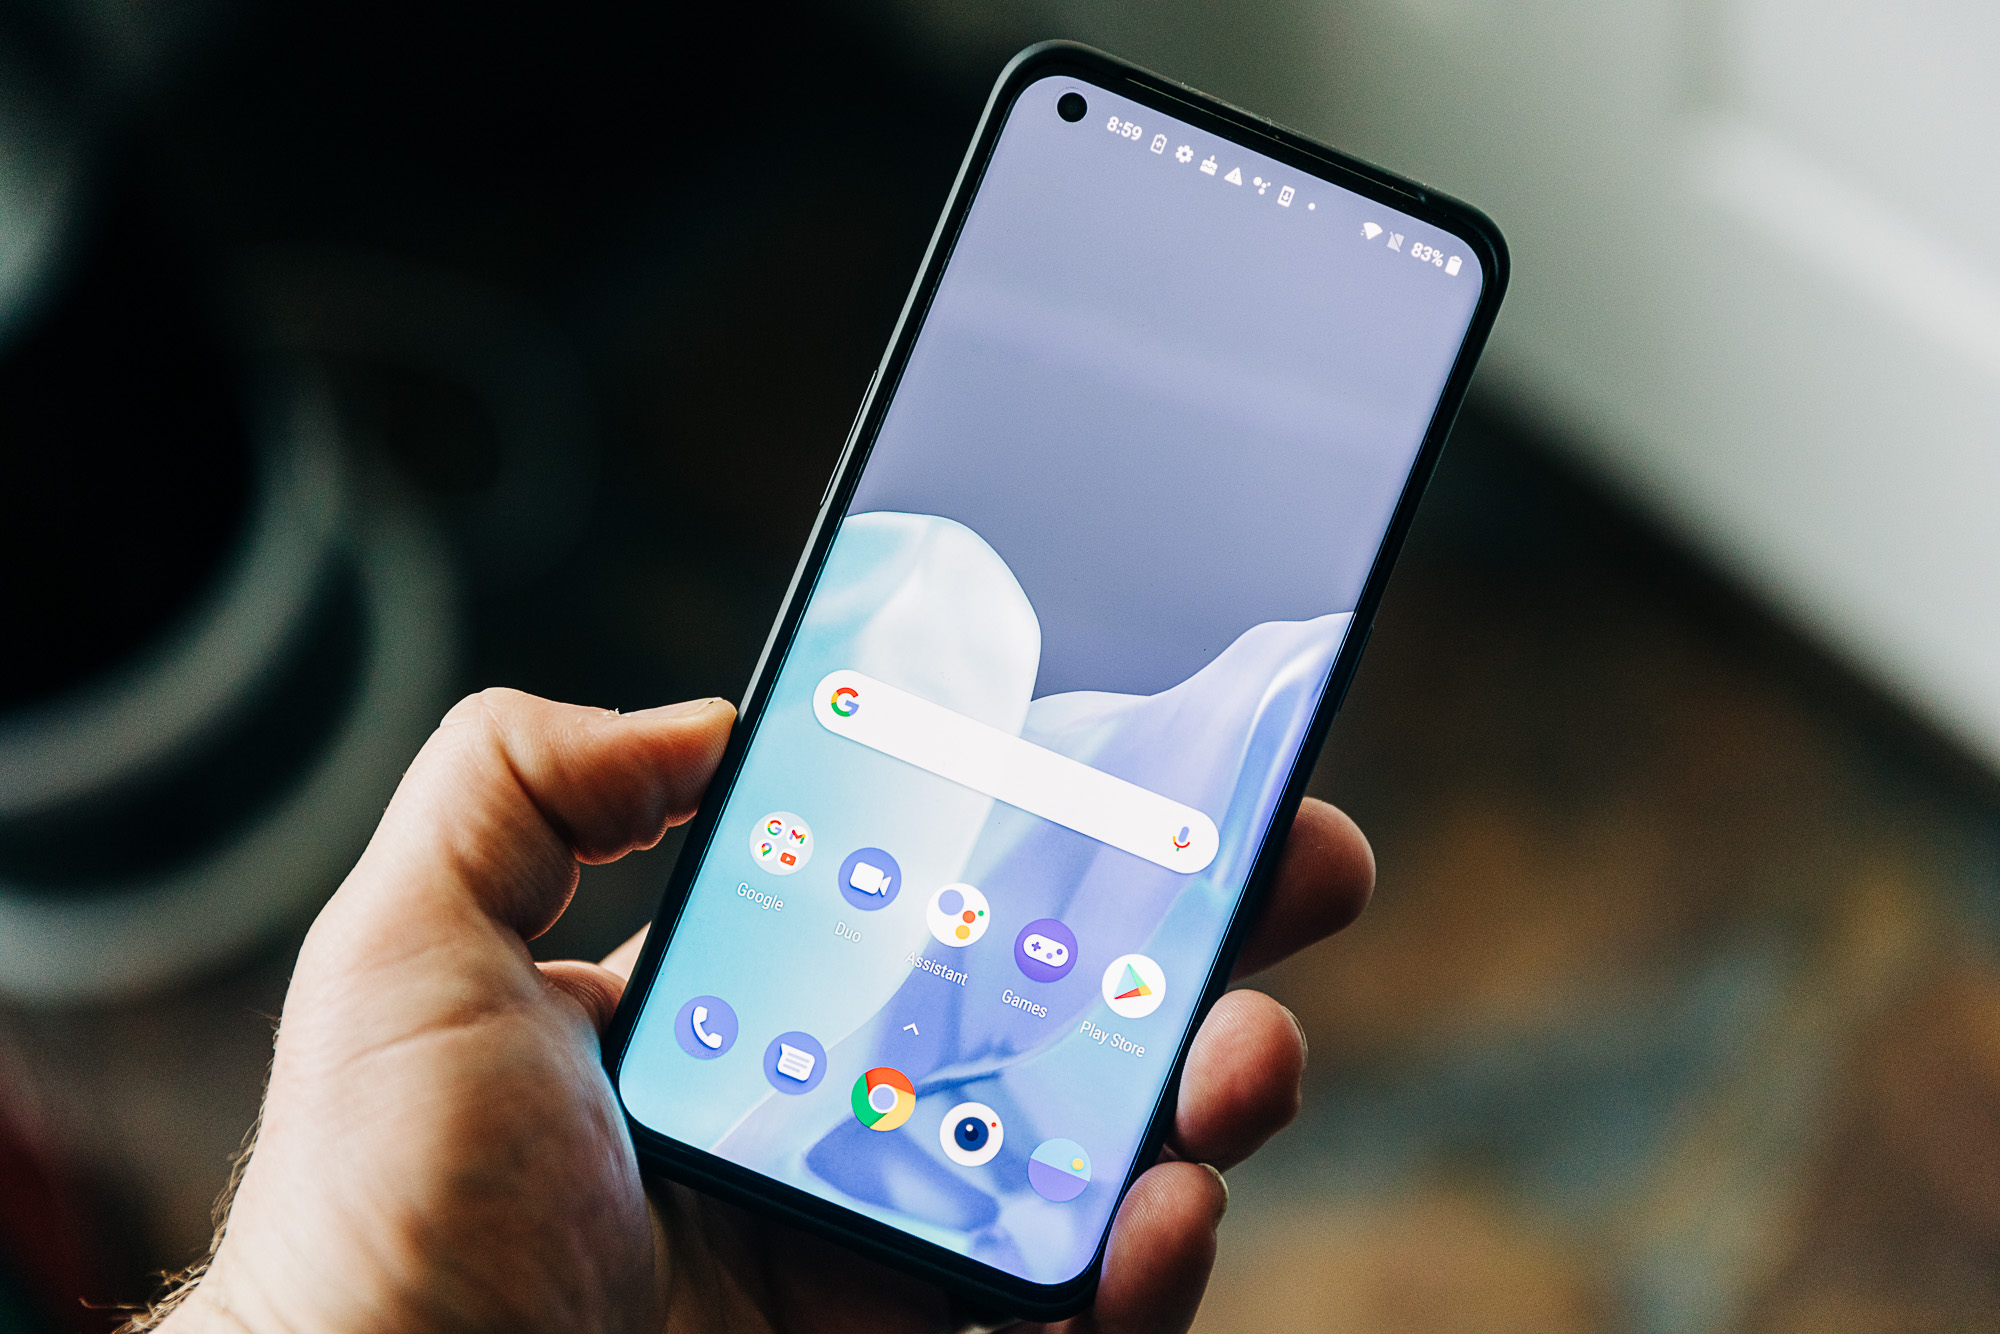 OnePlus 9 Pro Review: The Dependable Smartphone